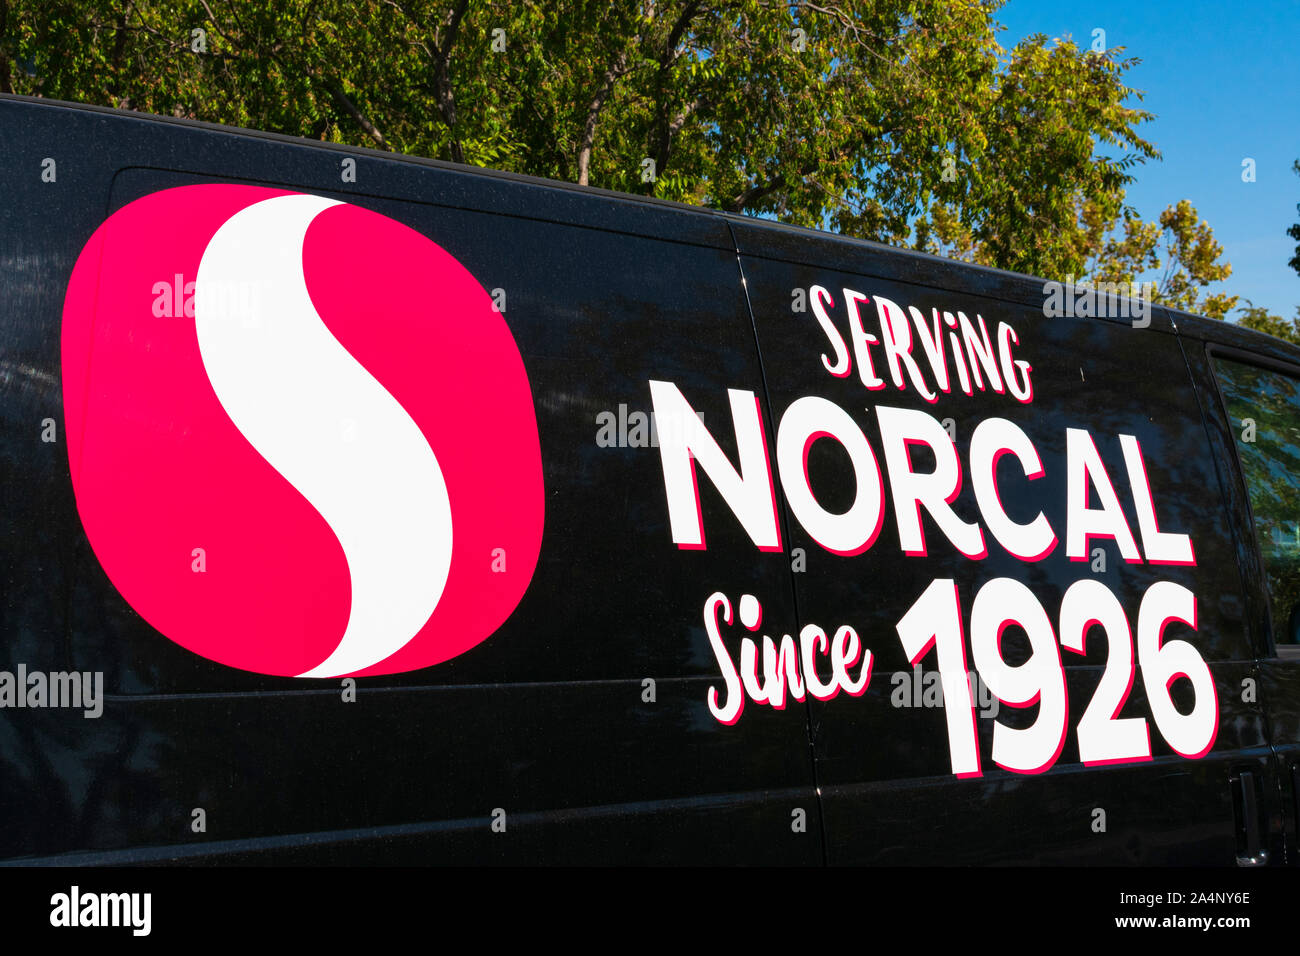 Safeway logo and slogan ‘Serving Northern California since 1926’ on the side of black Chevrolet van Stock Photo